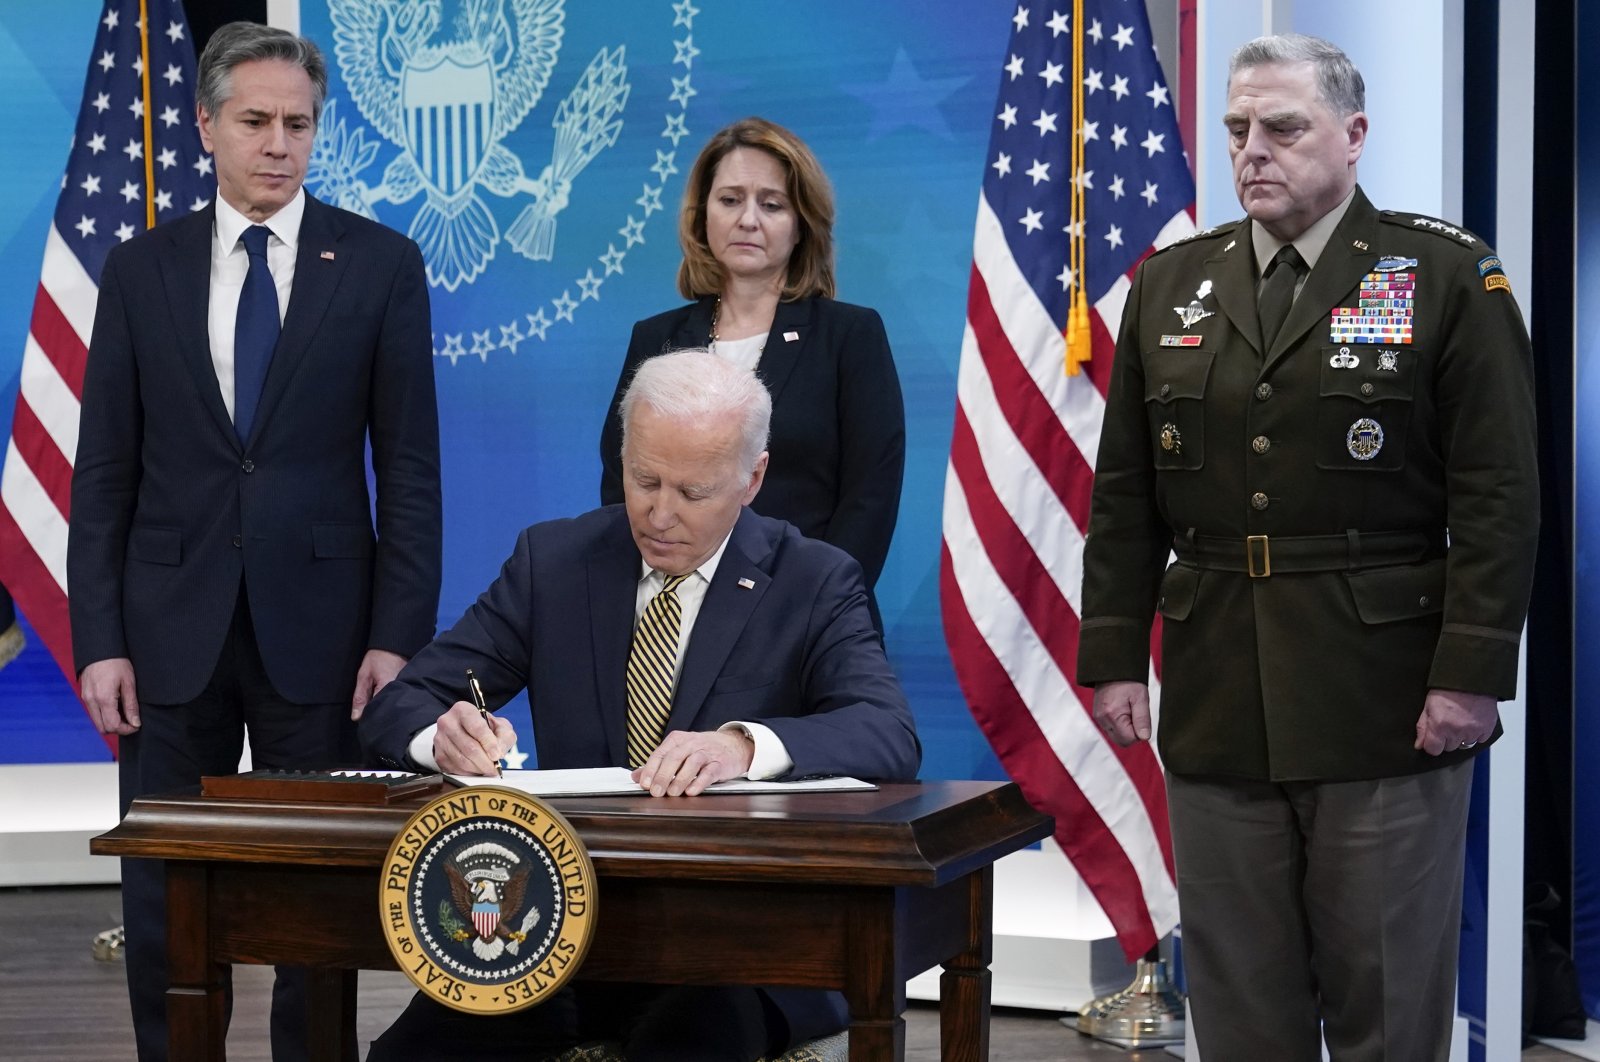 President Joe Biden signs a delegation of authority in the South Court Auditorium on the White House campus in Washington, Wednesday, March 16, 2022. (AP File Photo)